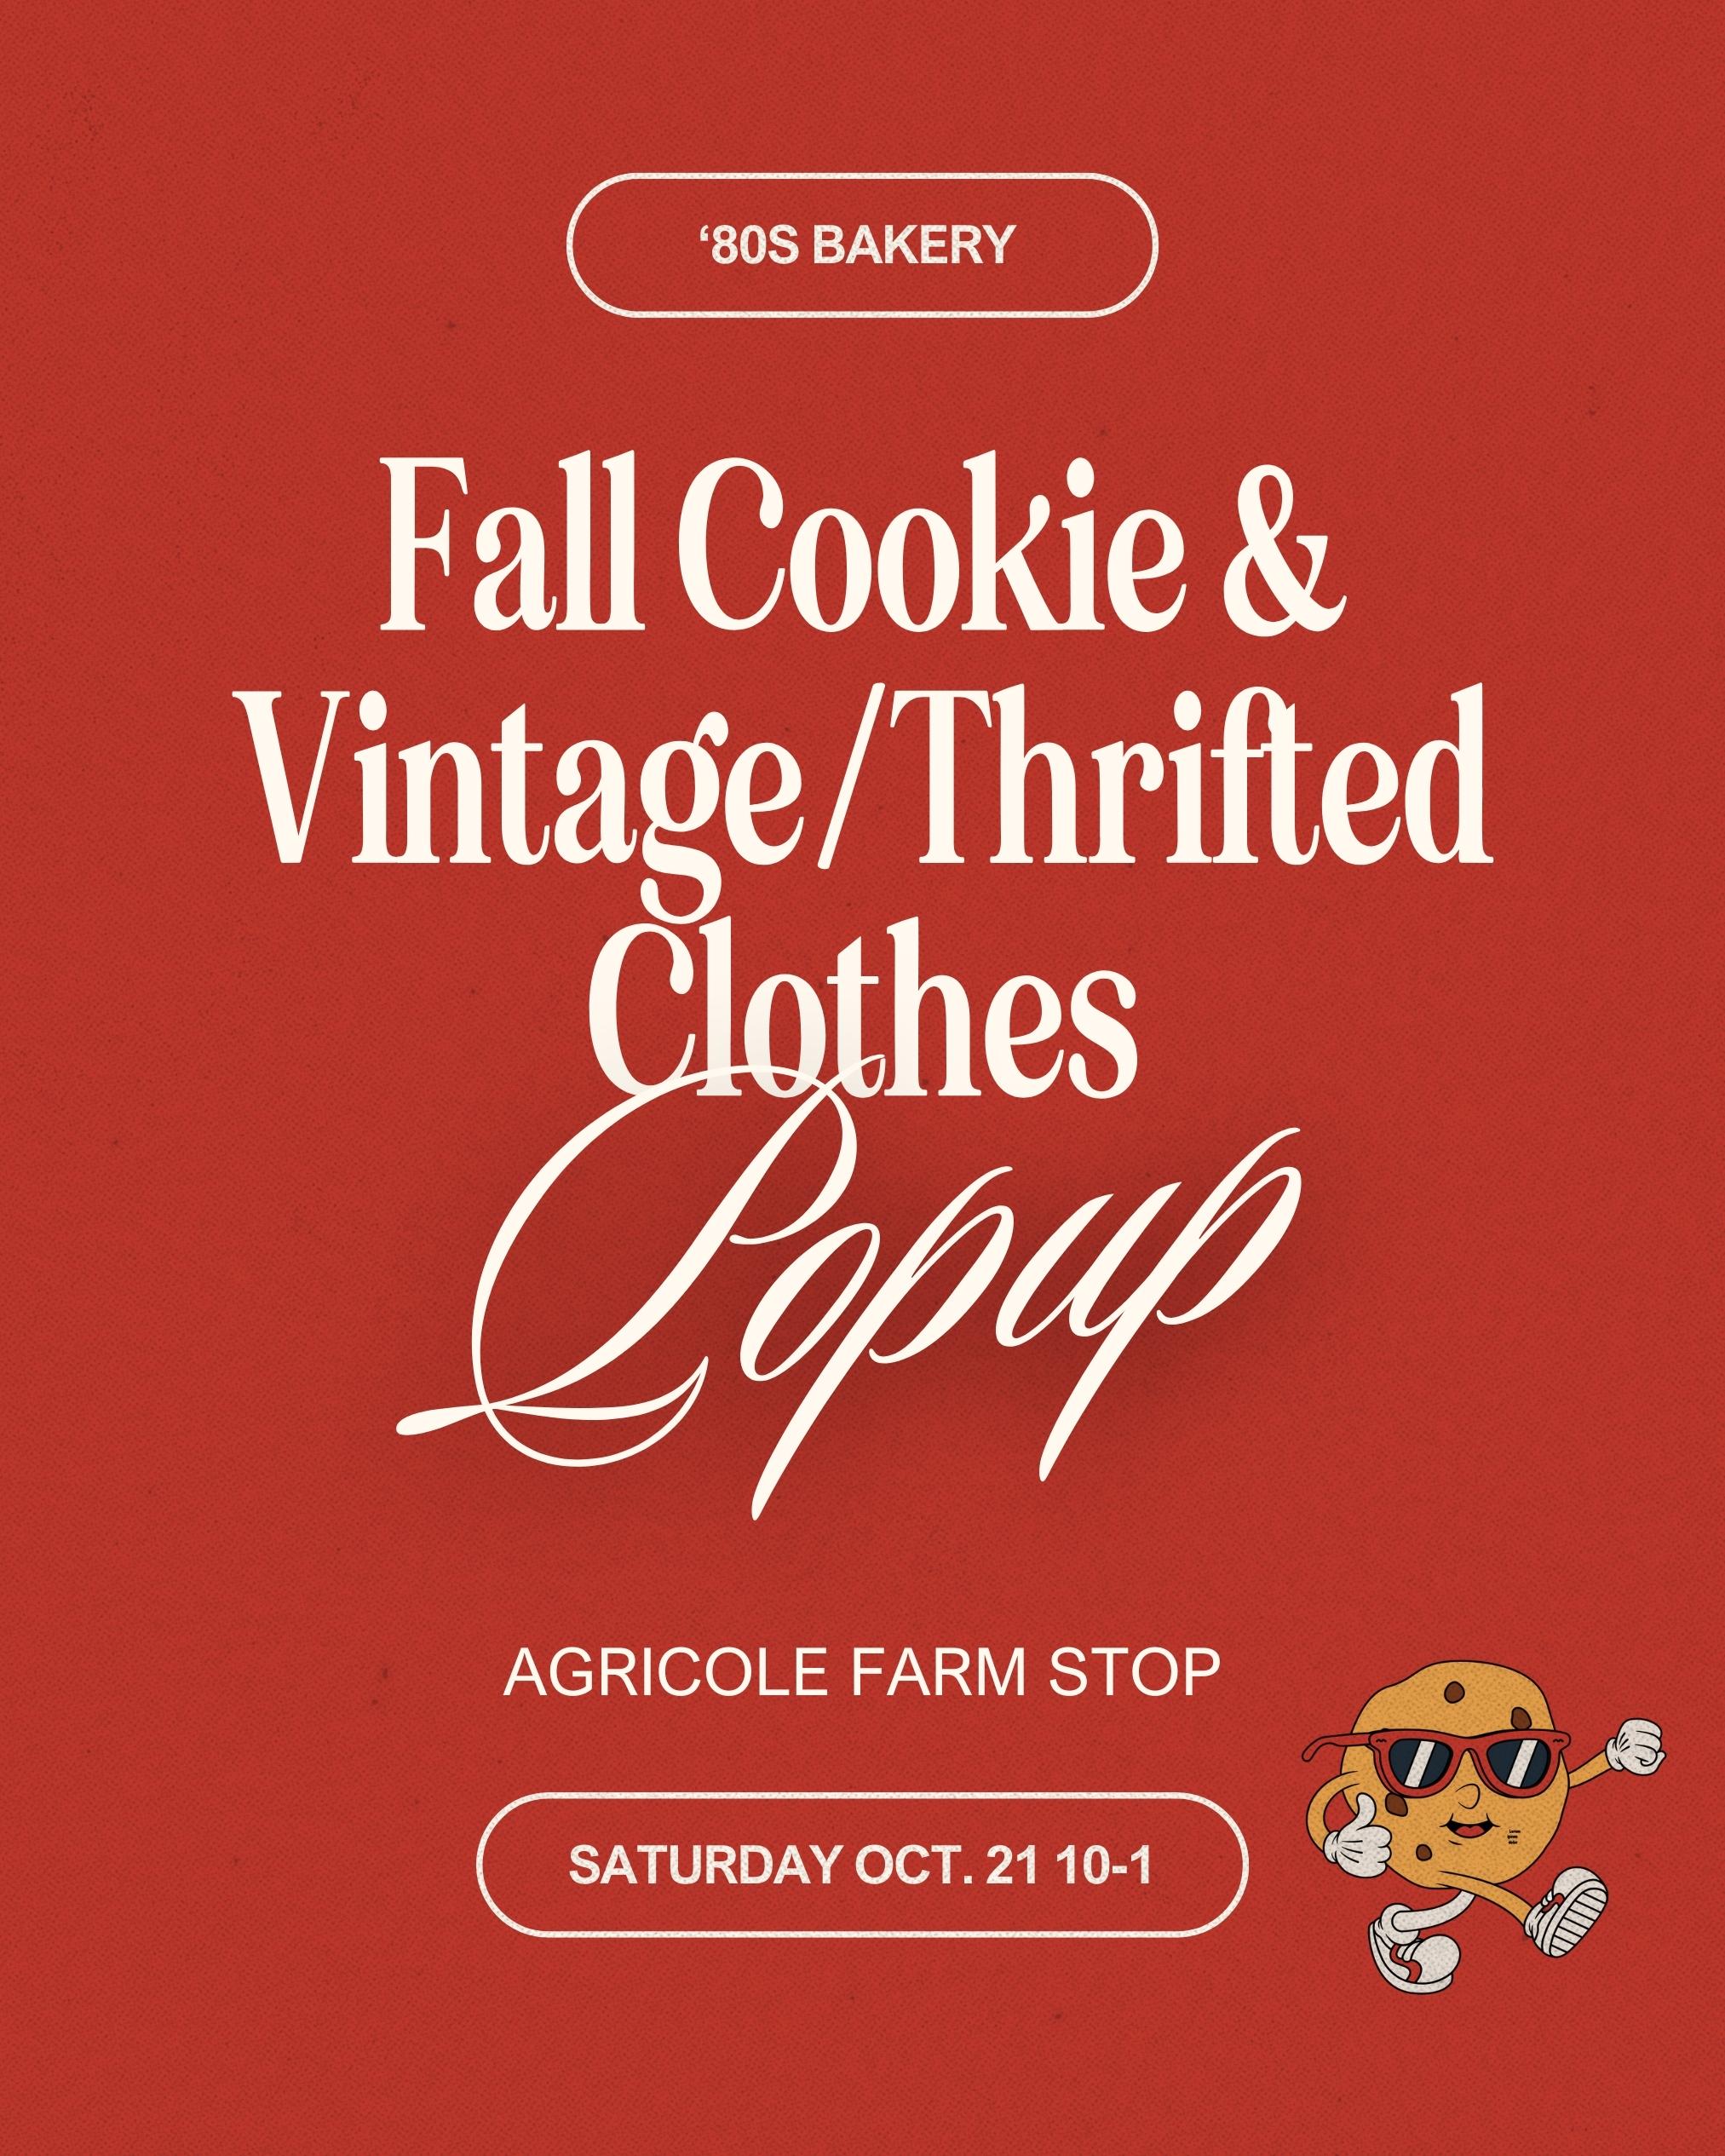 Fall Cookie and Vintage/Thrifted Clothes Pop-Up